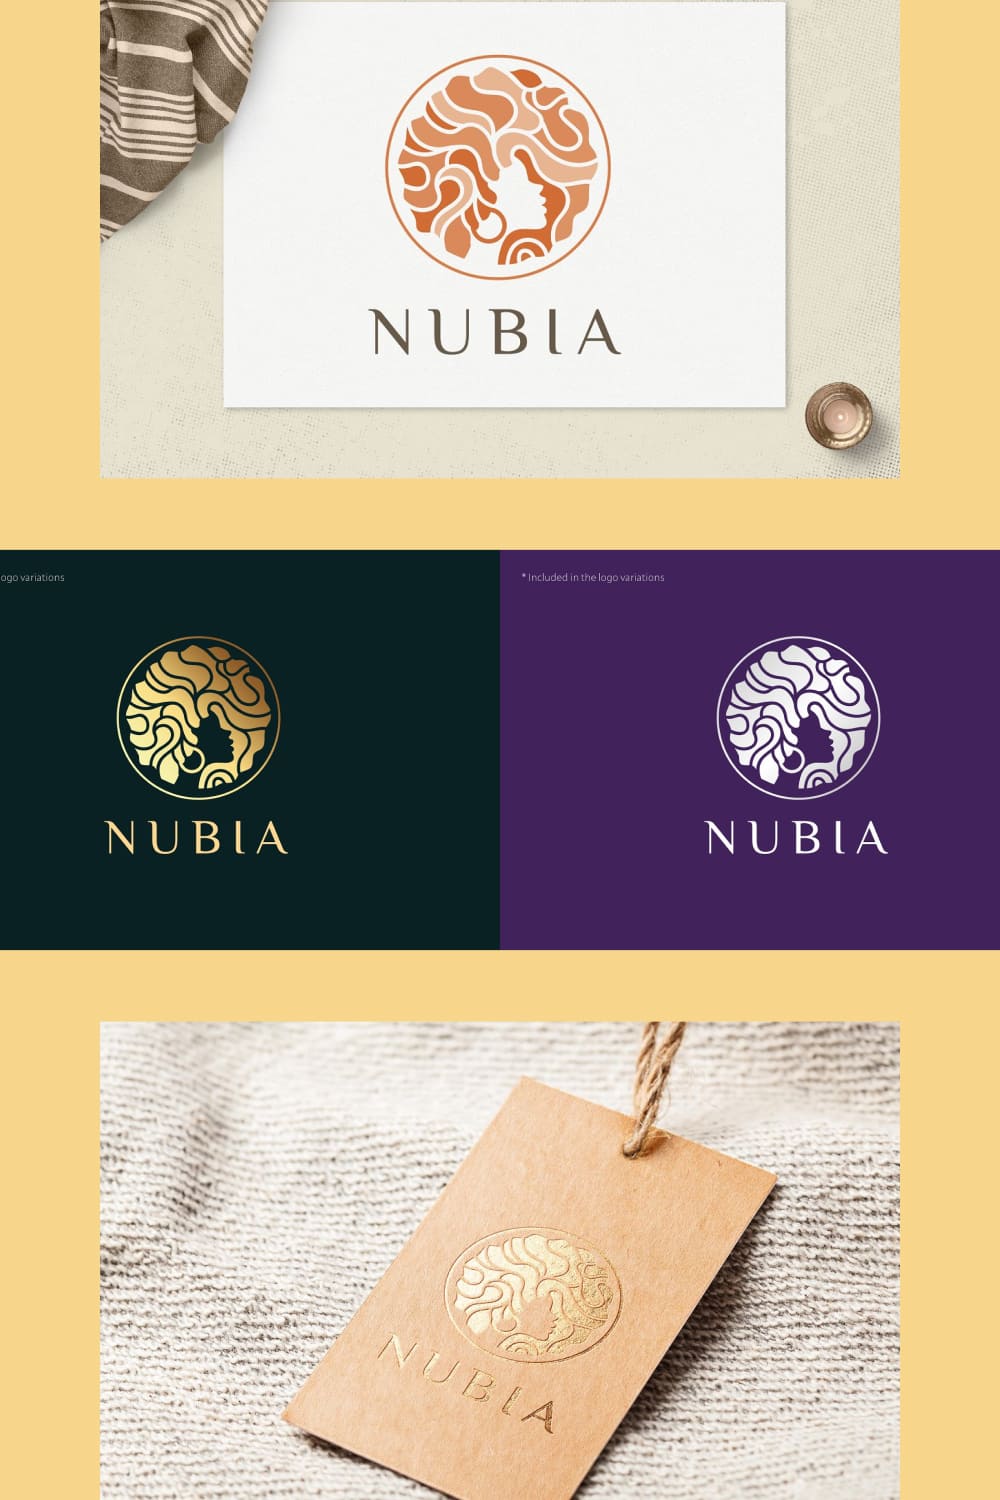 Endless possibilities for using logo design in your business.